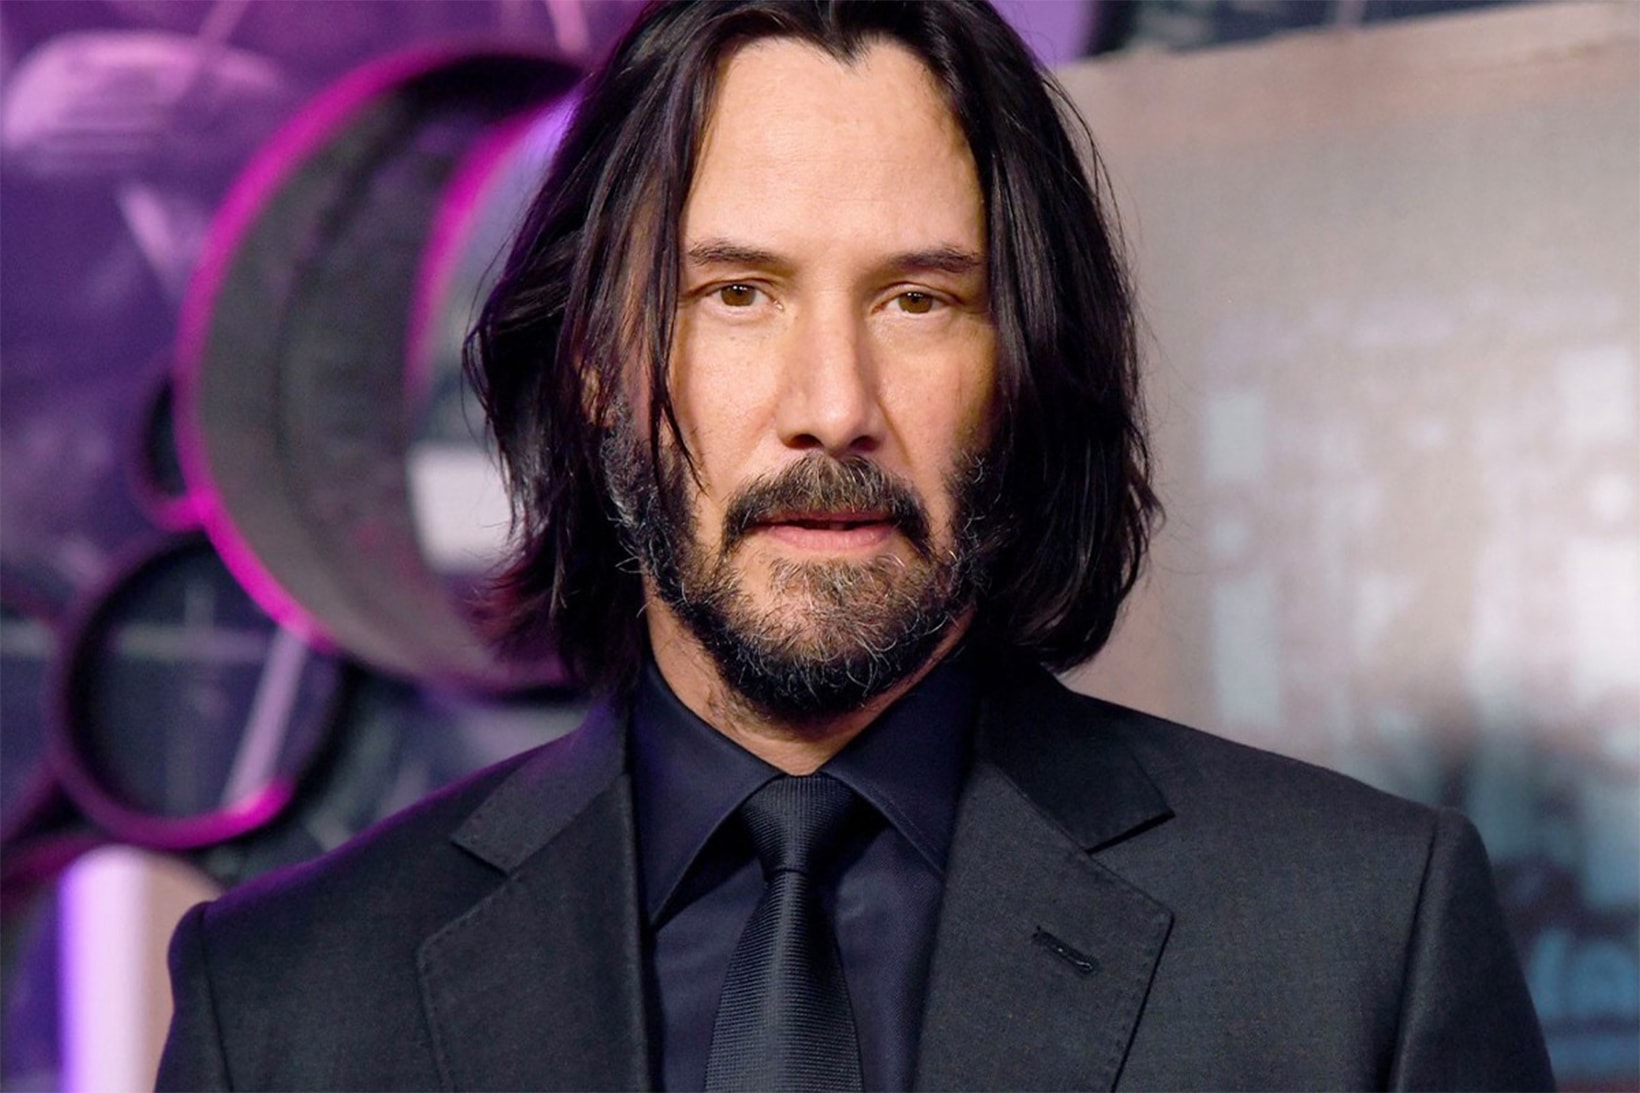 Keanu Reeves Earnings Cancer Research The Matrix Hollywood 